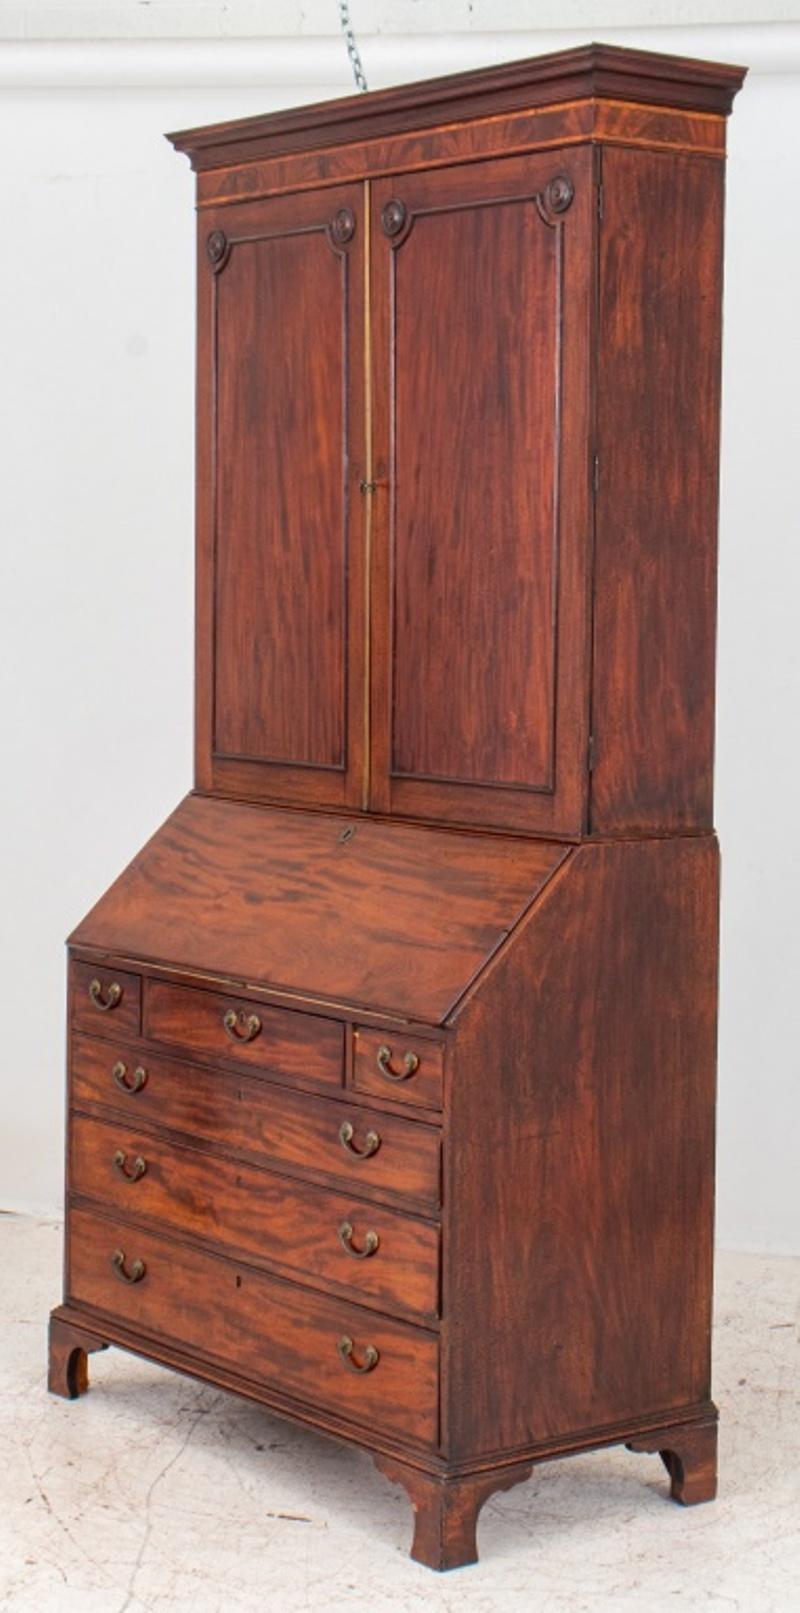 George III mahogany slant front desk with bookcase, circa 1800, the upper section with flat molded edge cornice and two paneled doors; the lower section with slant top opening to ten small drawers, eight cubby holes, and a small cabinet, the writing